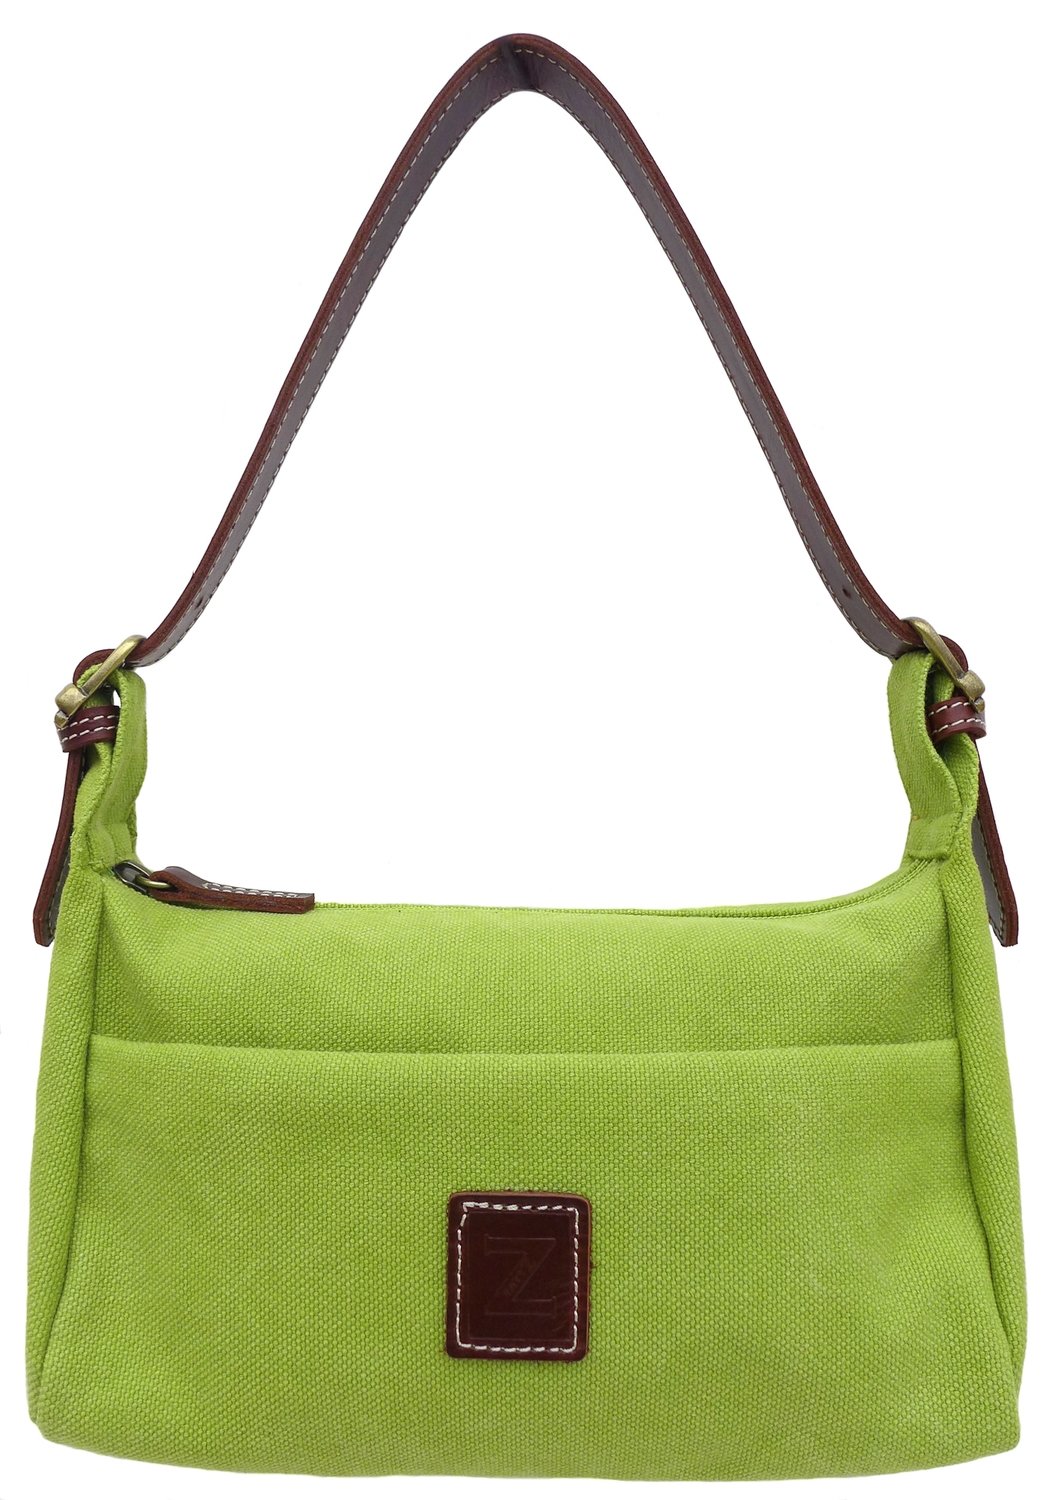 Small shoulder purse (lime)